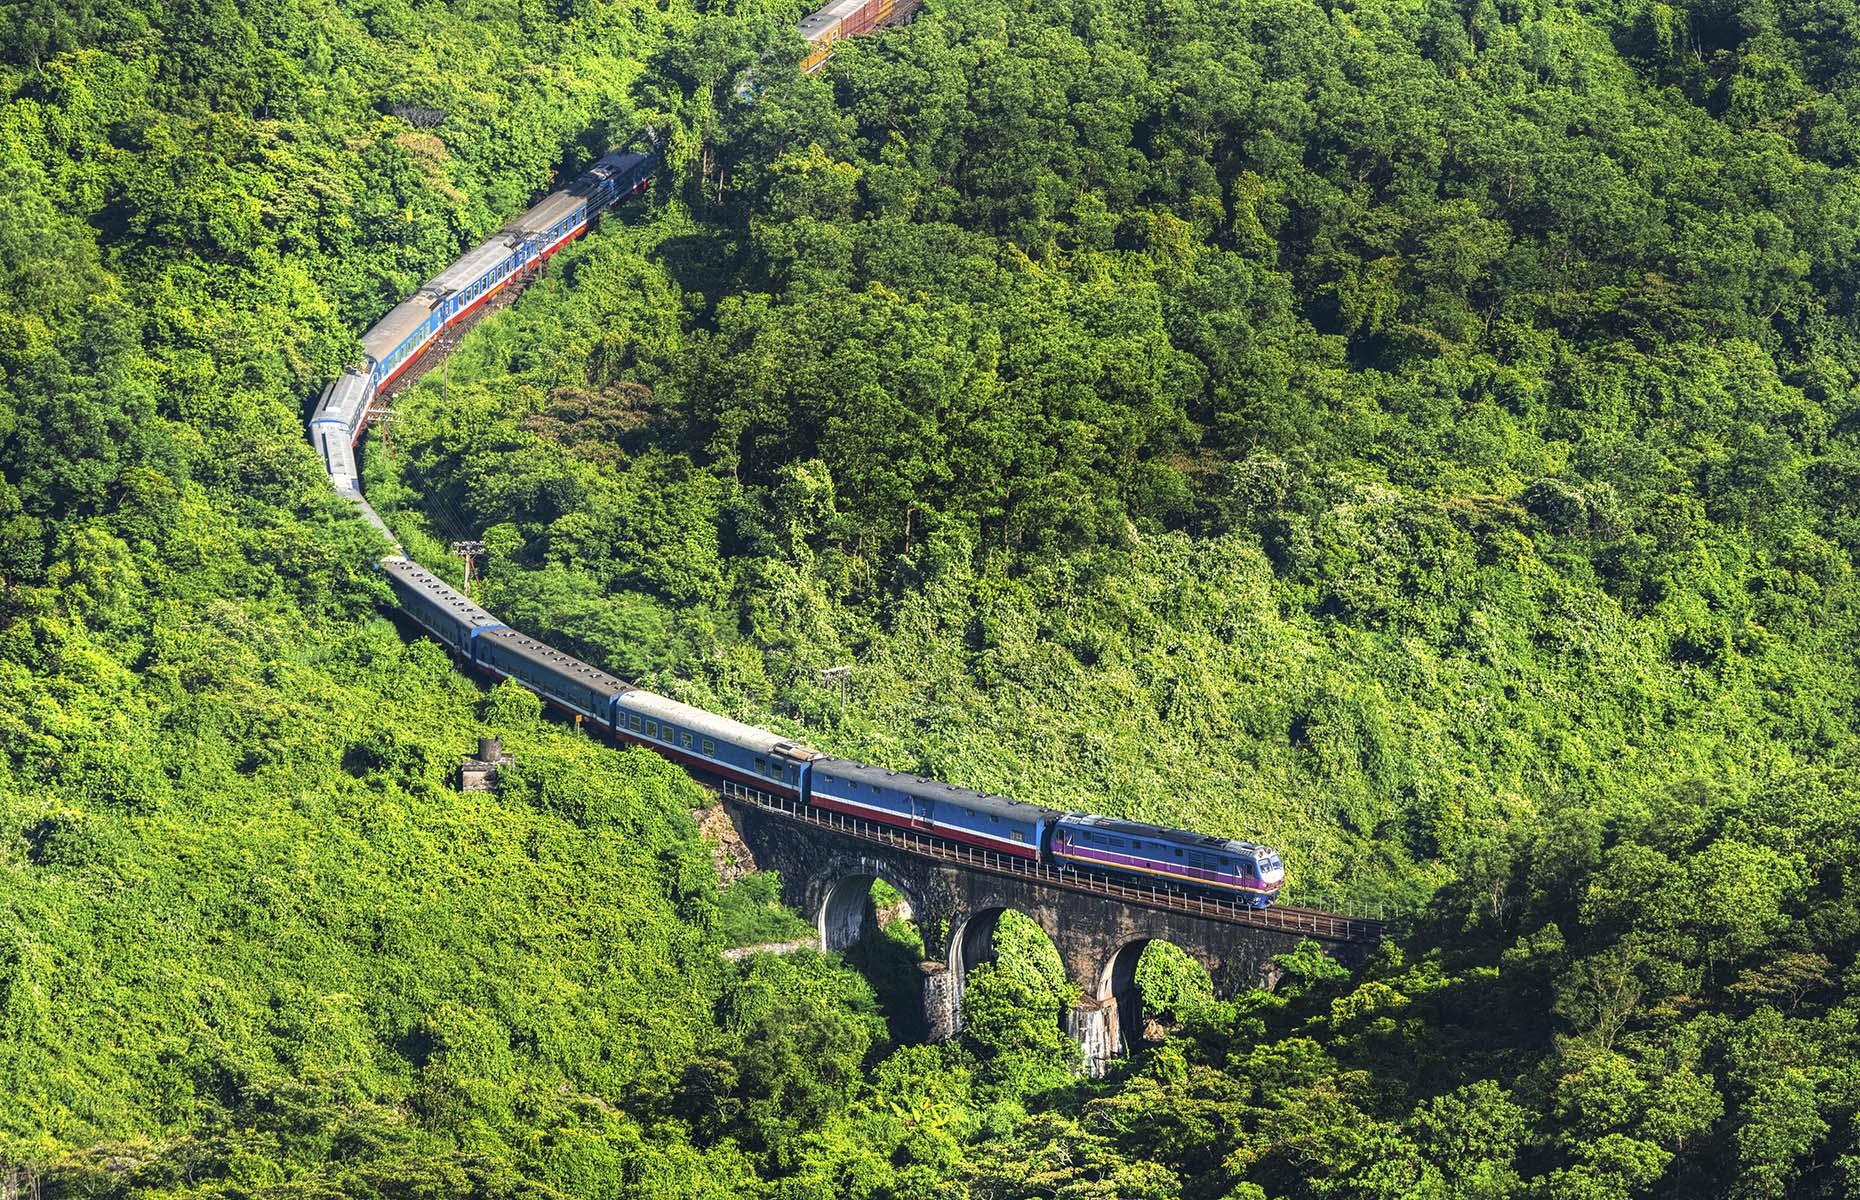 A trip on this train takes in breathtaking Vietnamese landscapes like Hải Vân Pass, Vân Phong Bay and the Annamite Range. Prices for the full, one-way journey between Hanoi and Ho Chi Minh City start from $40 for a soft seat while soft sleeper lower berths with air conditioning start from $62.